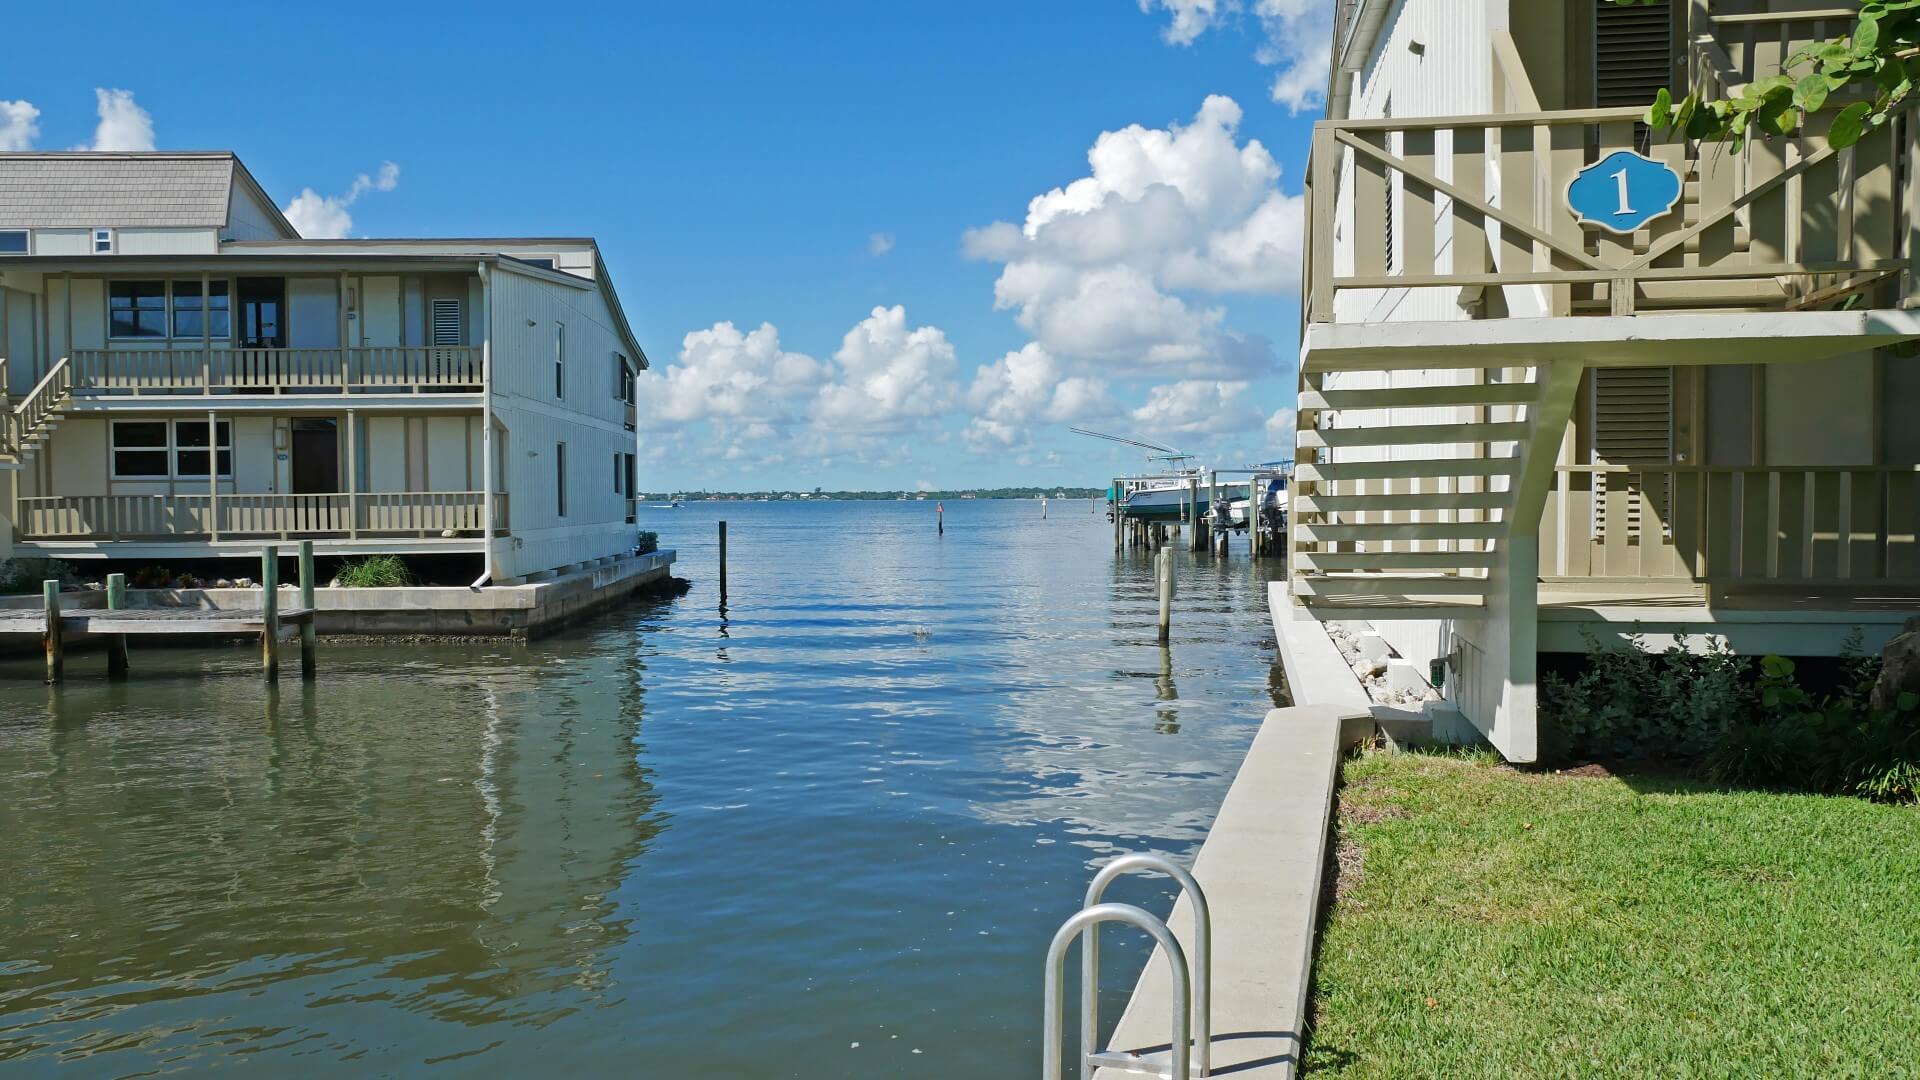 Anglers Cove Condo With Ocean Access Dock Sold ⋆ Stuart